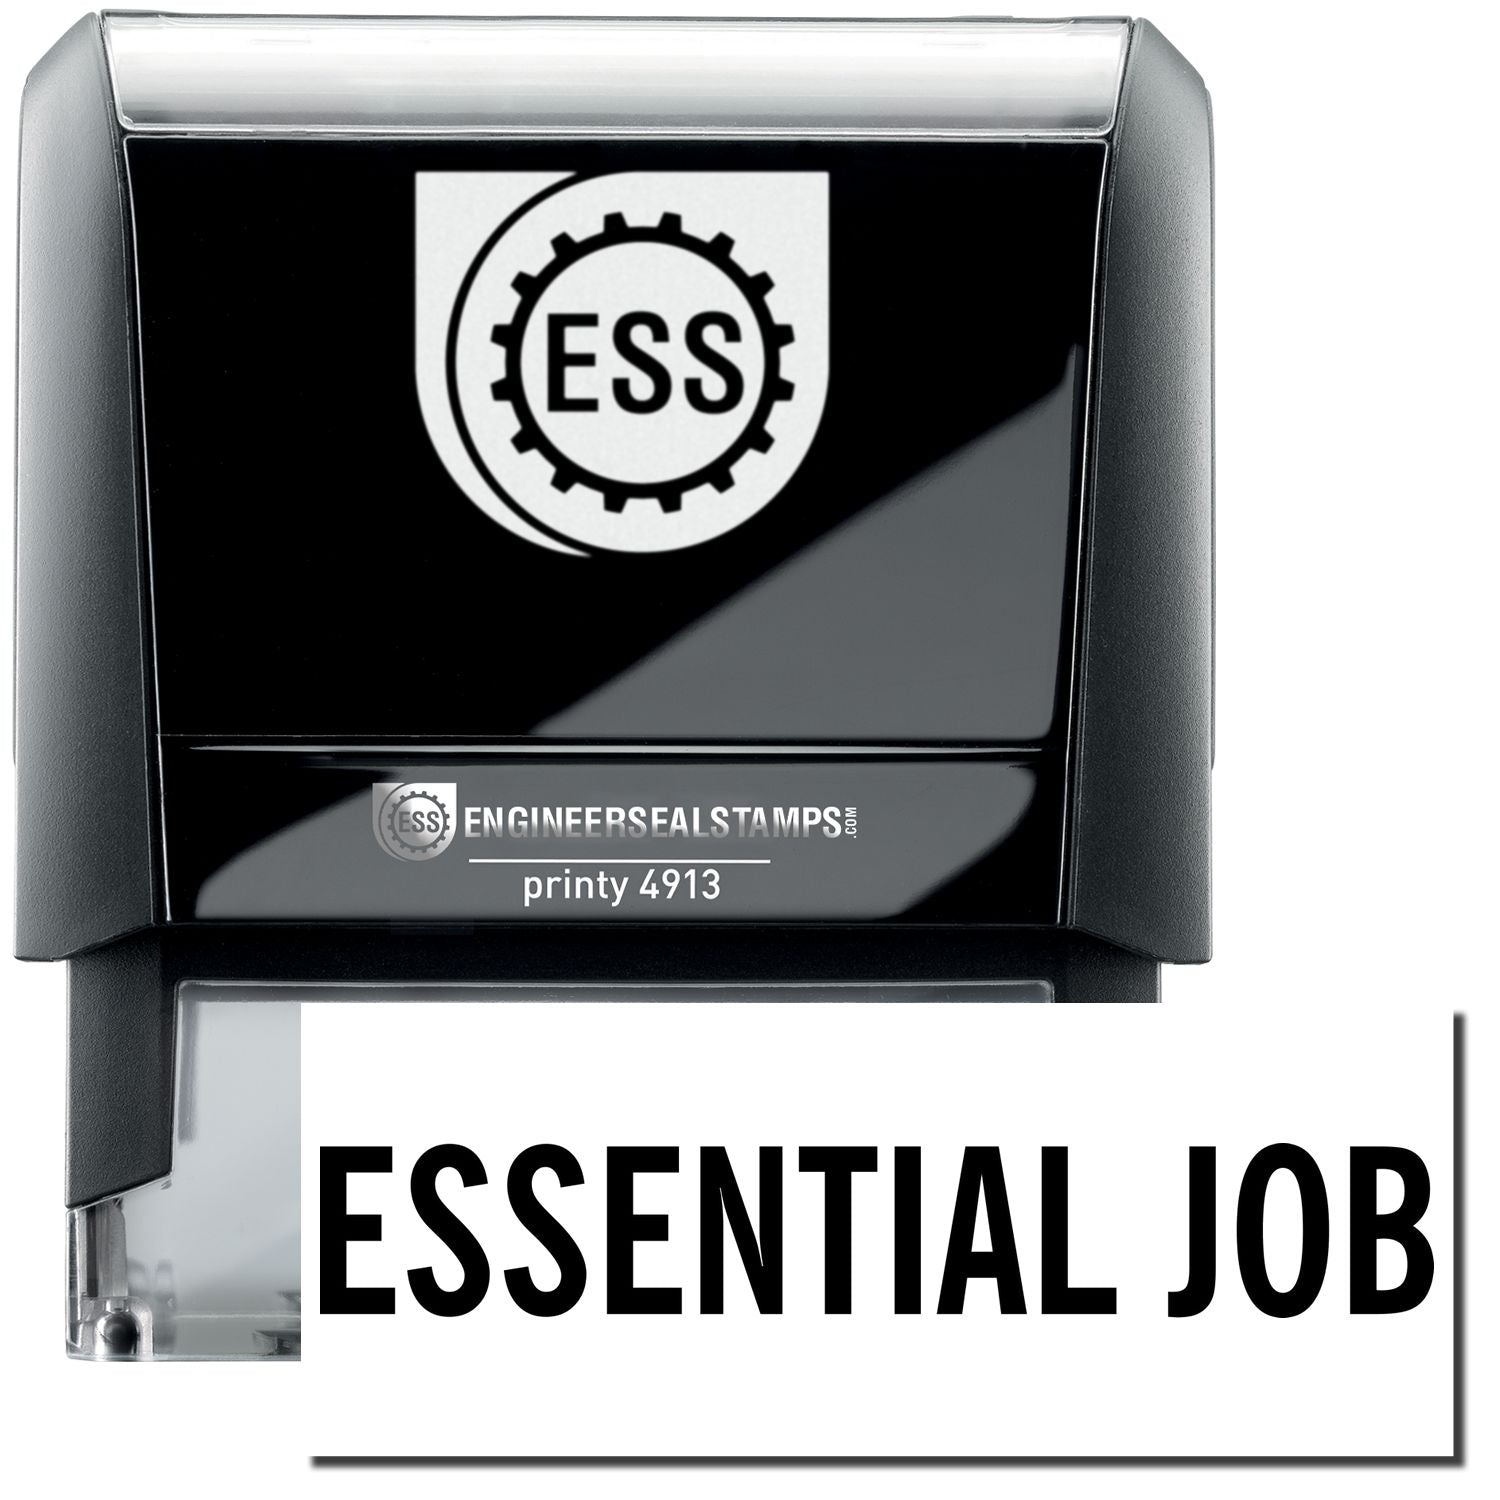 A self-inking stamp with a stamped image showing how the text "ESSENTIAL JOB" in a large font is displayed by it after stamping.